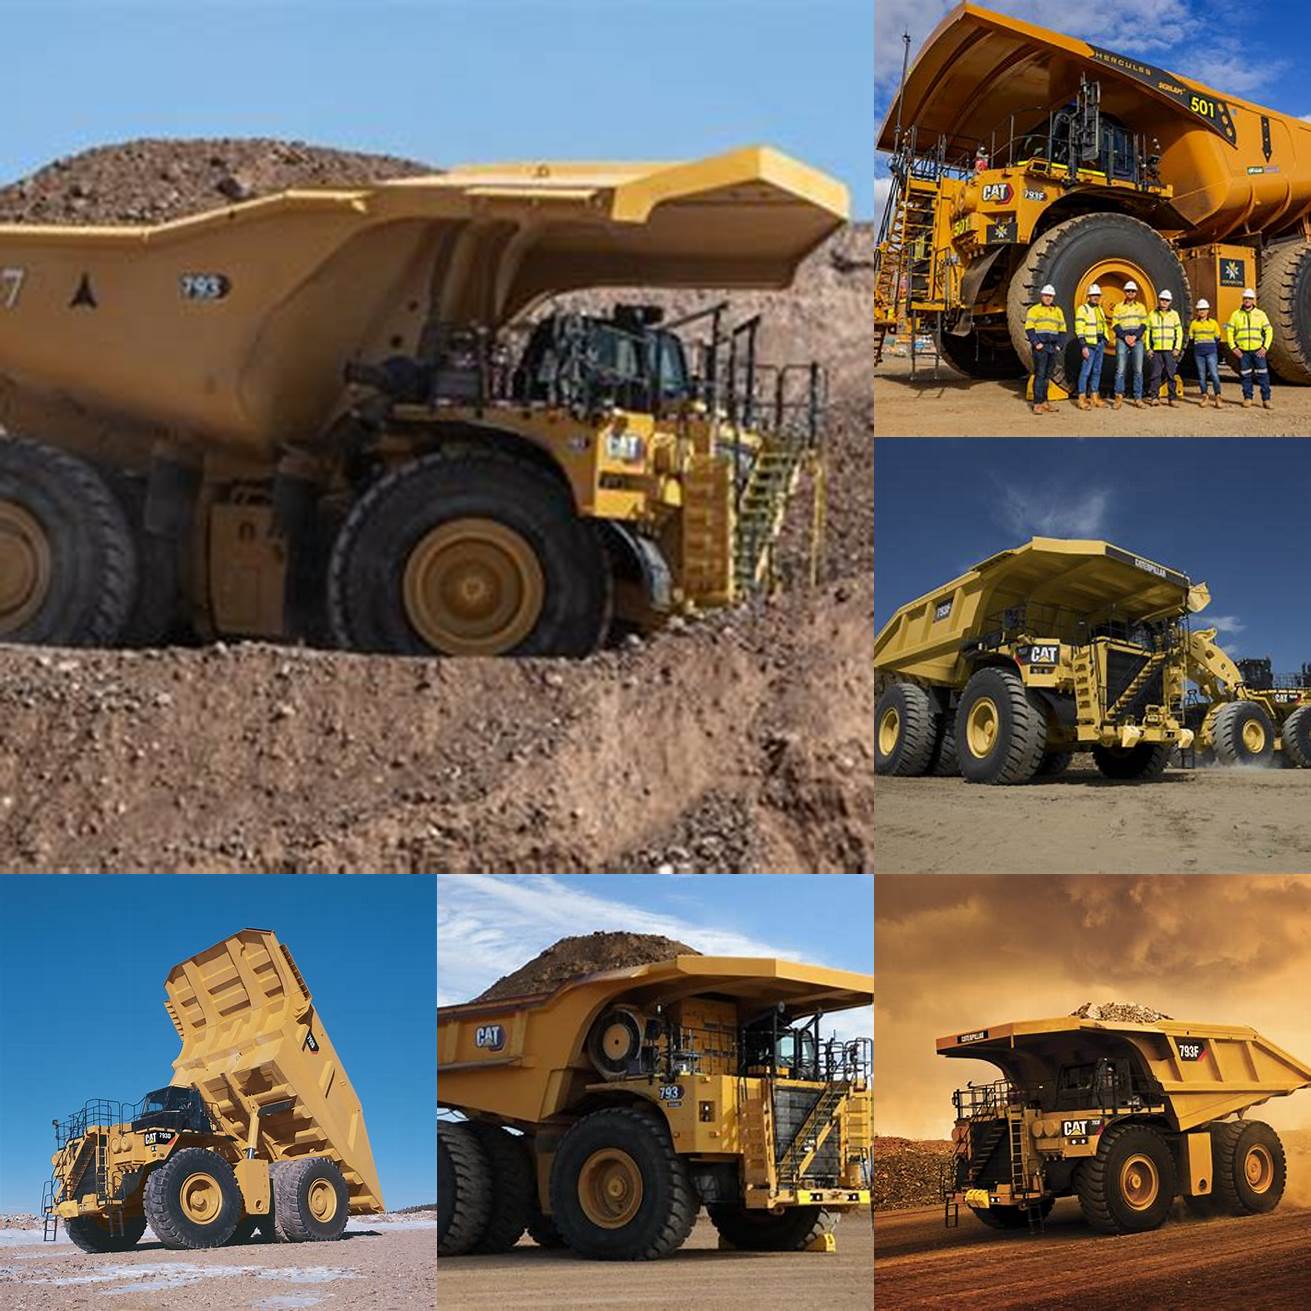 Q How many people can operate the Cat 793 haul truck